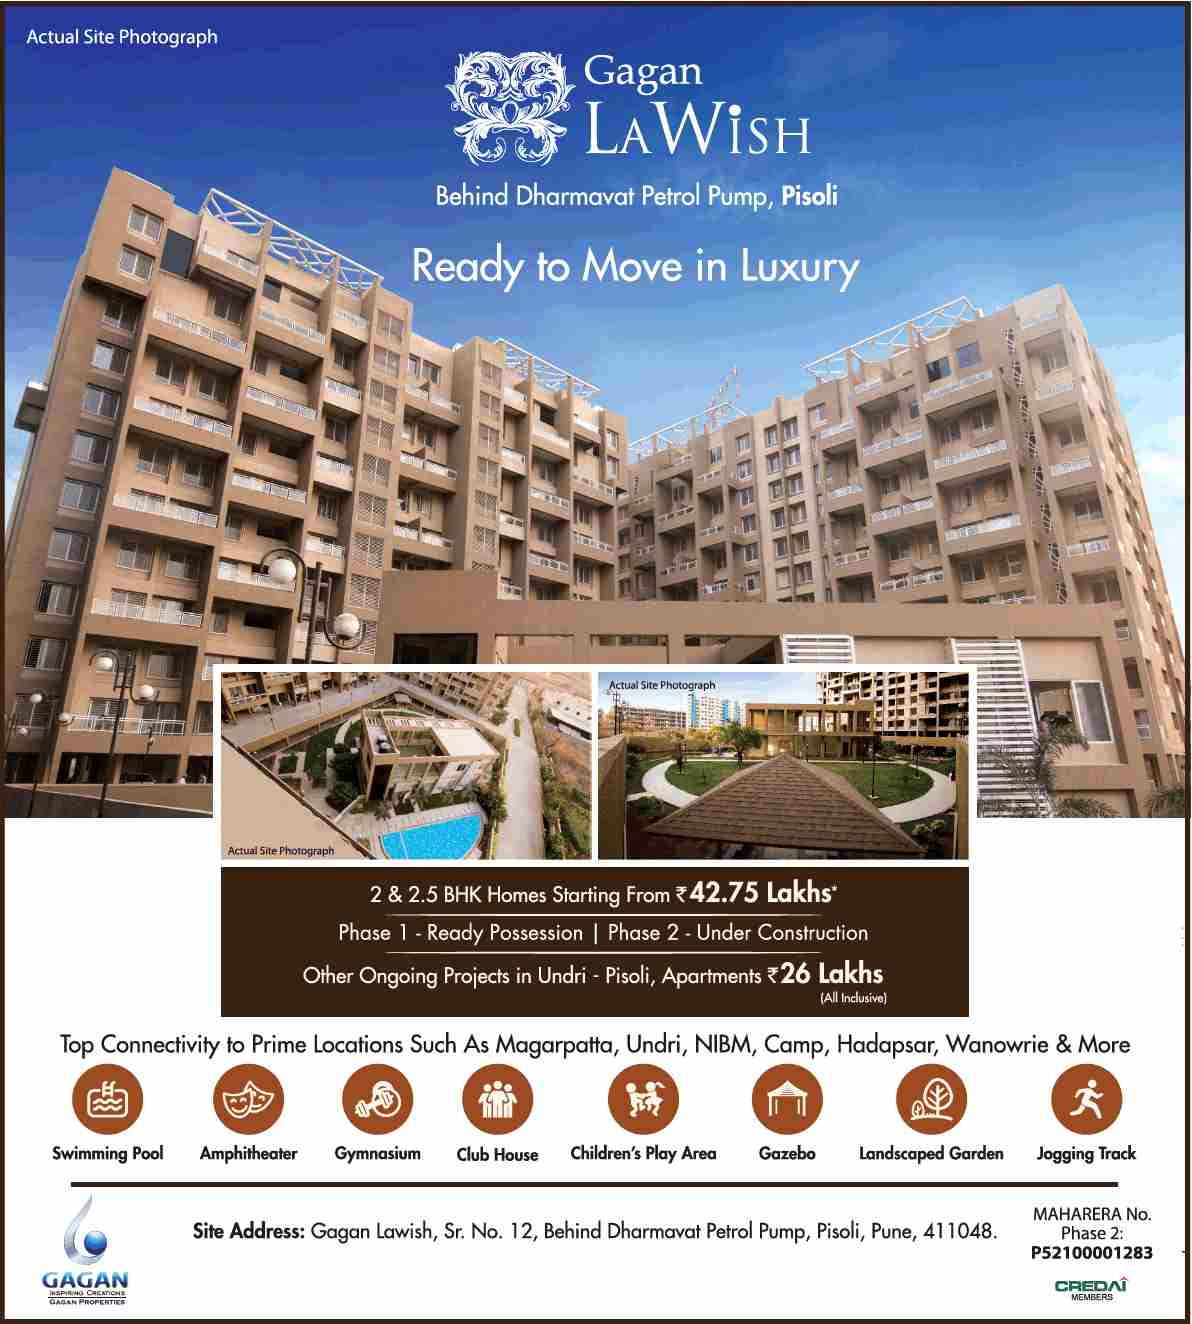 Live in ready to move in luxury homes at Gagan Lawish in Pune Update